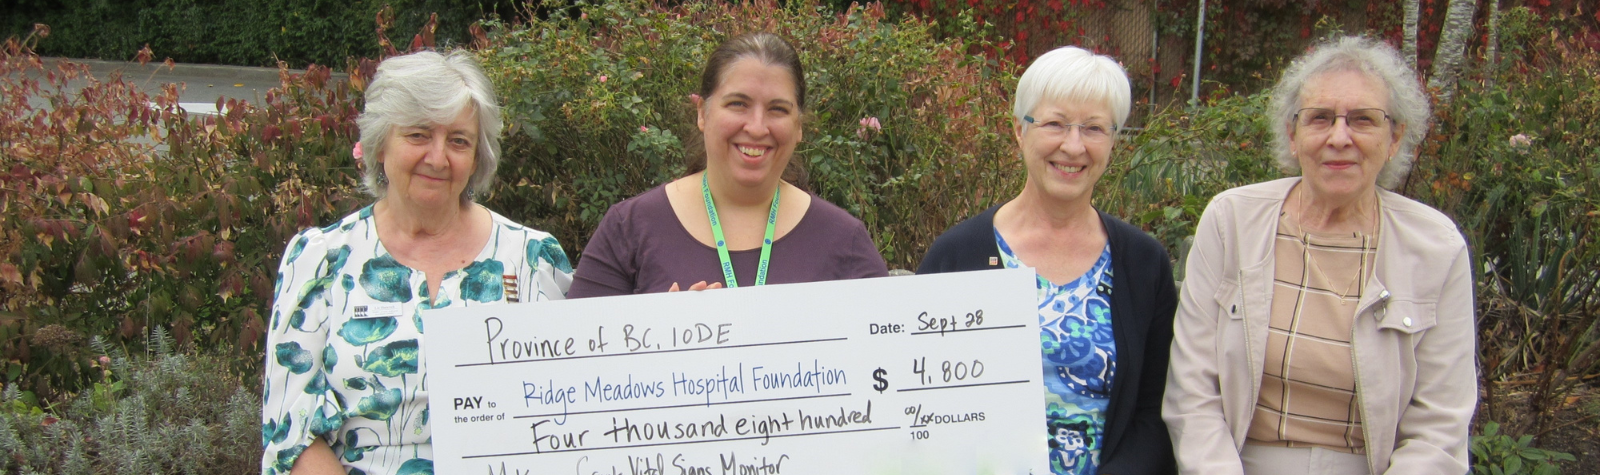 IODE Provincial Chapter of BC generously supports McKenny Creek Hospice